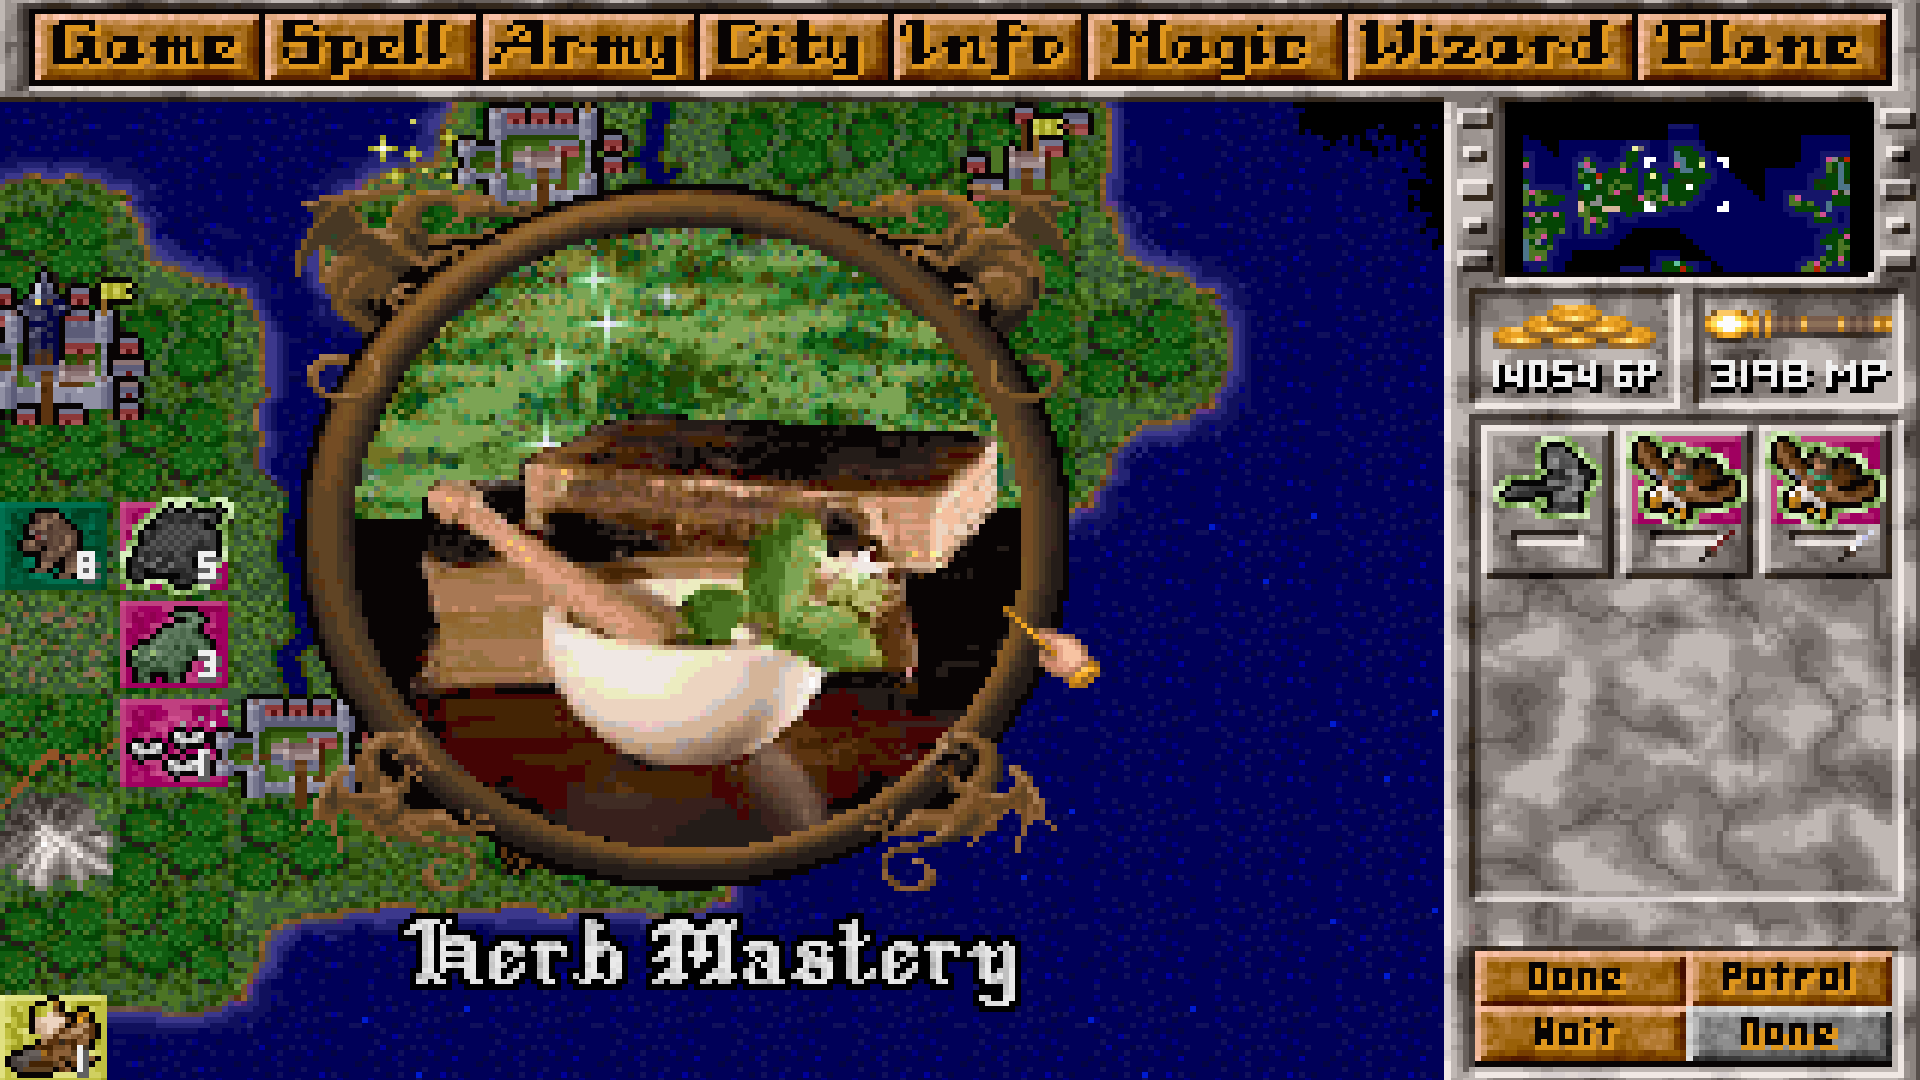 download masters of magic classic